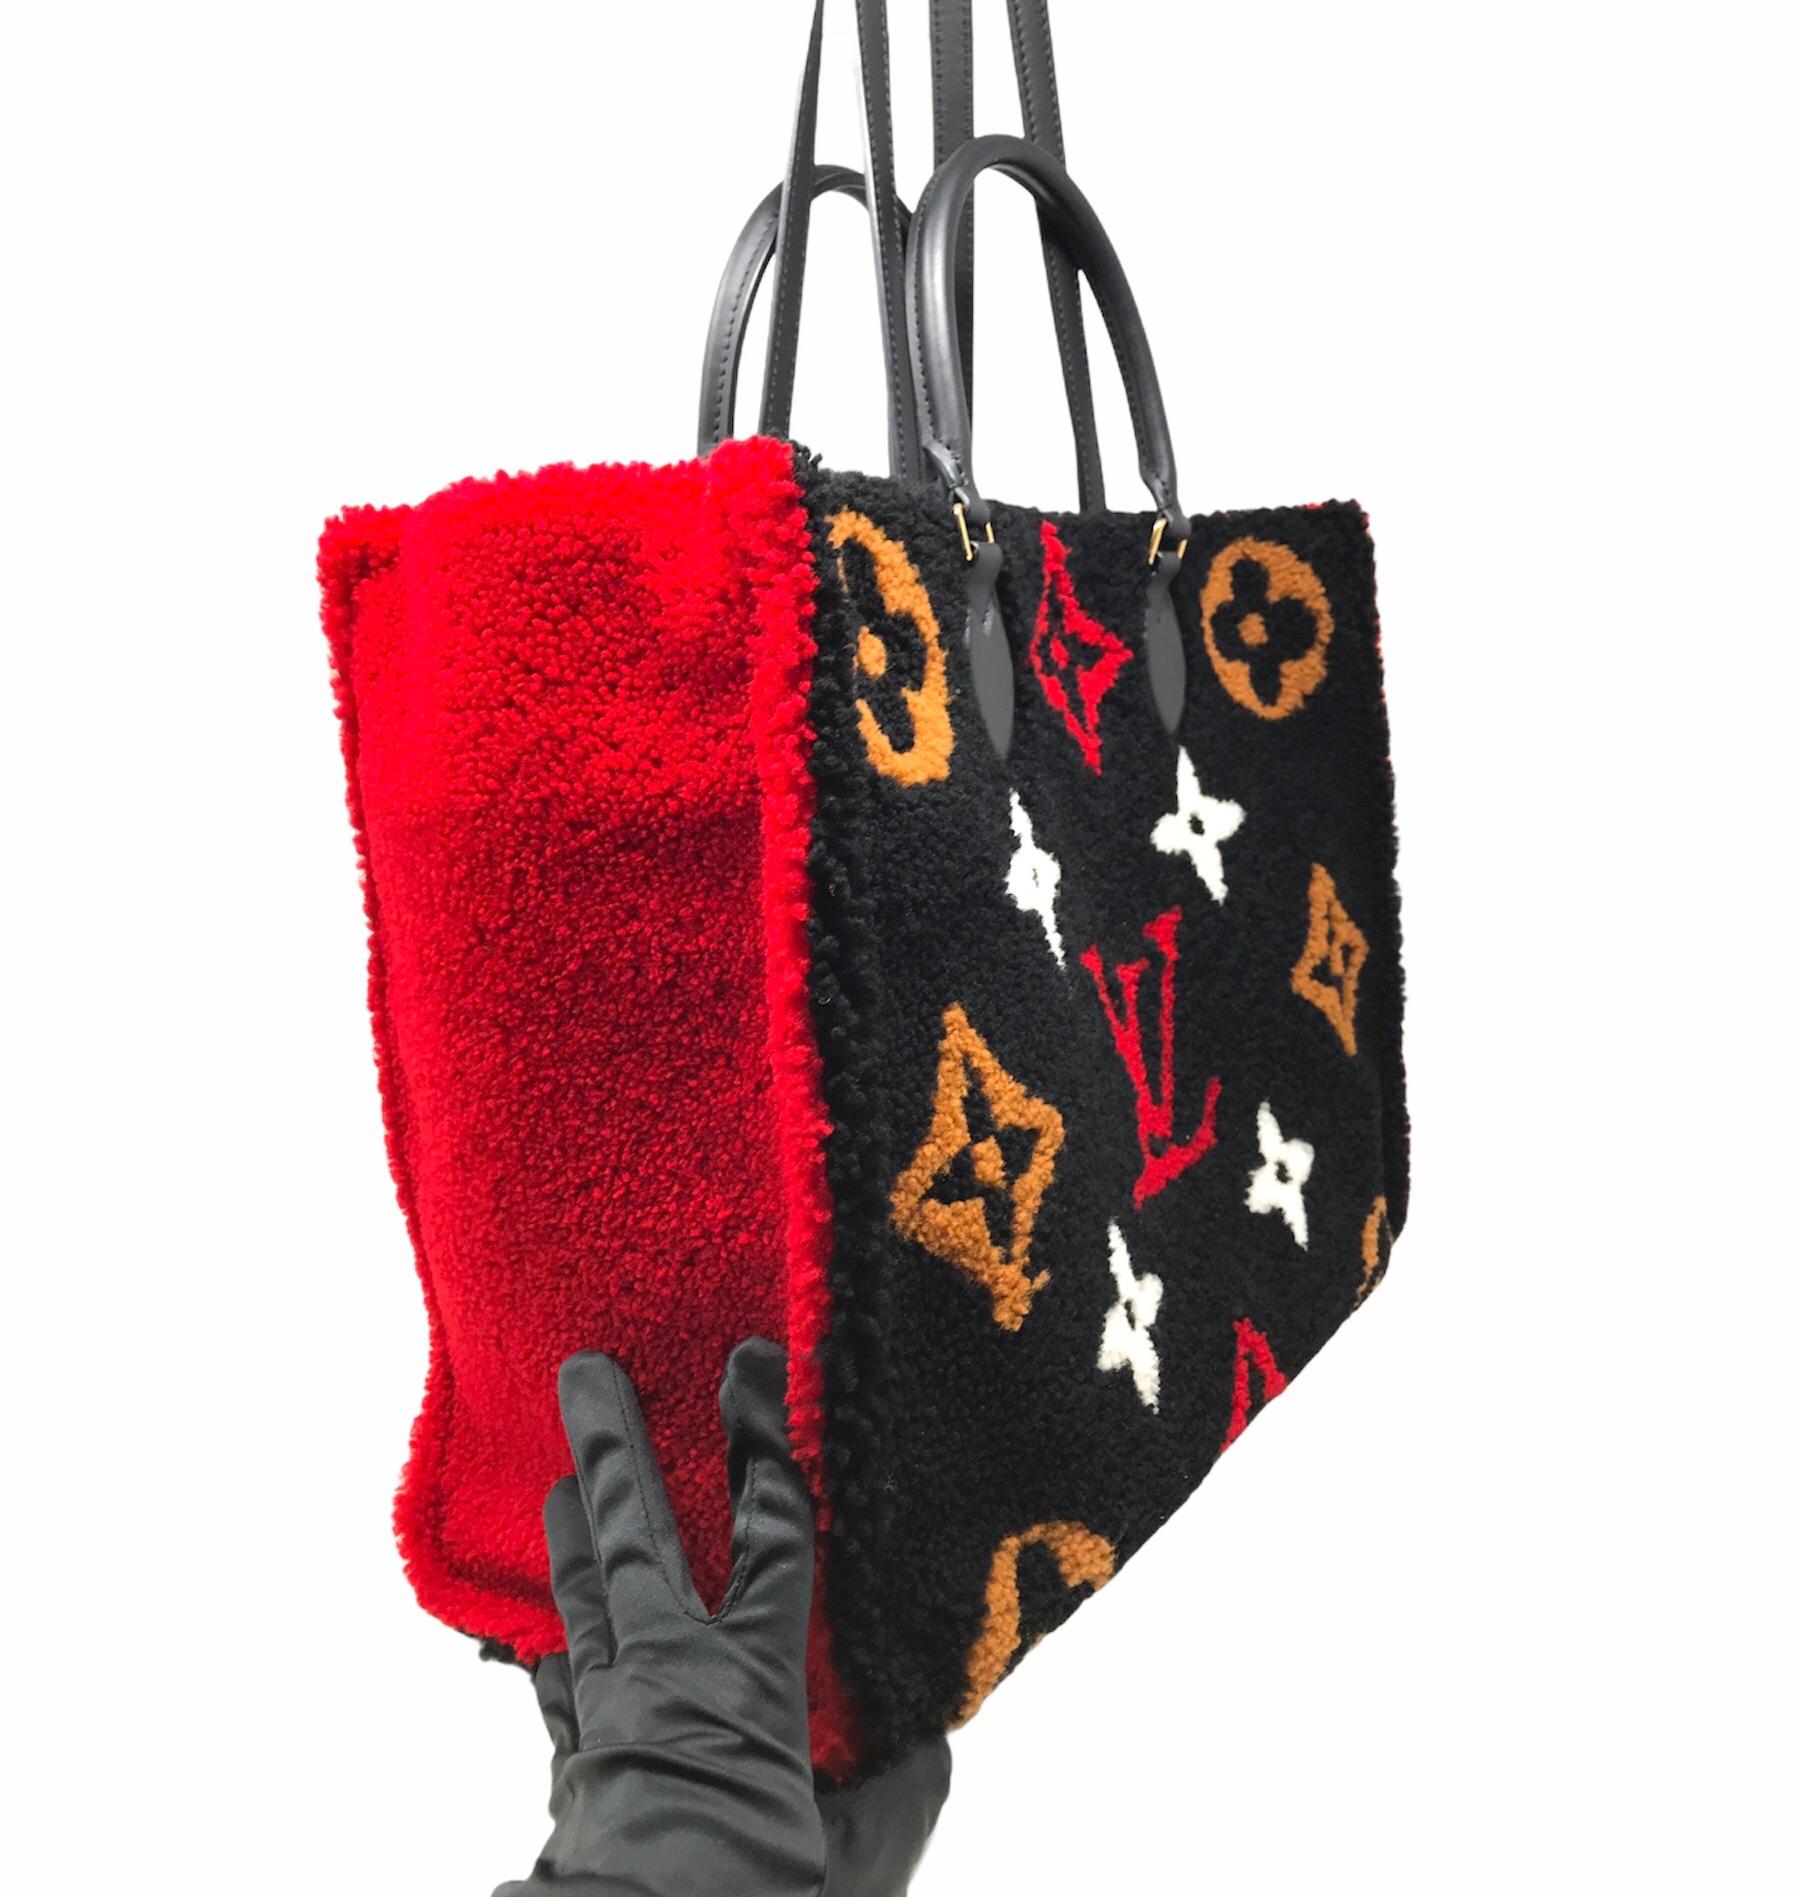 Louis Vuitton Monogram teddy Onthego bag in multicolored sheepskin, leather handles with suede interior, 2019 collection
The black sheepskin fur bag is embellished with shearling inserts depicting the Monogram flowers and the LV initials. The red,